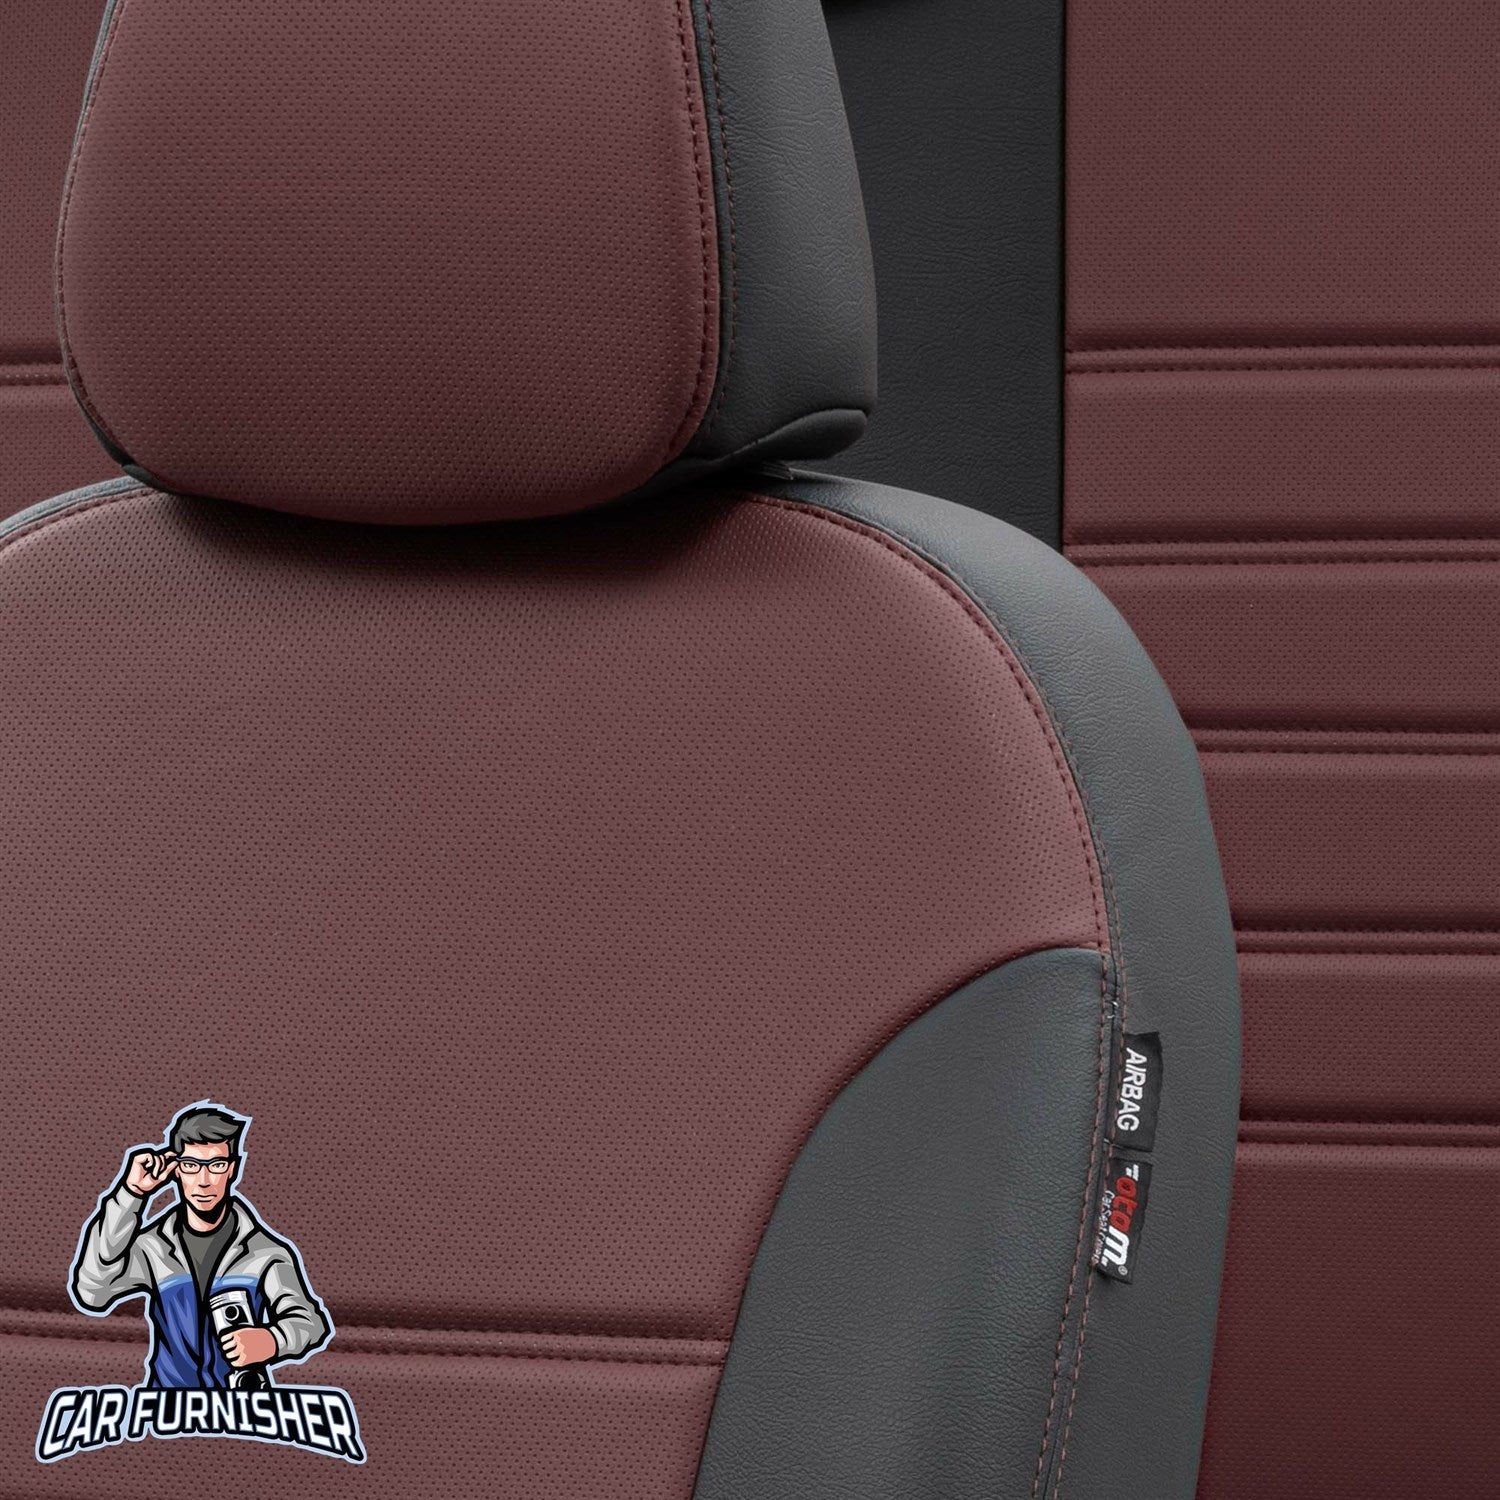 Volkswagen Jetta Seat Cover Istanbul Leather Design Burgundy Leather